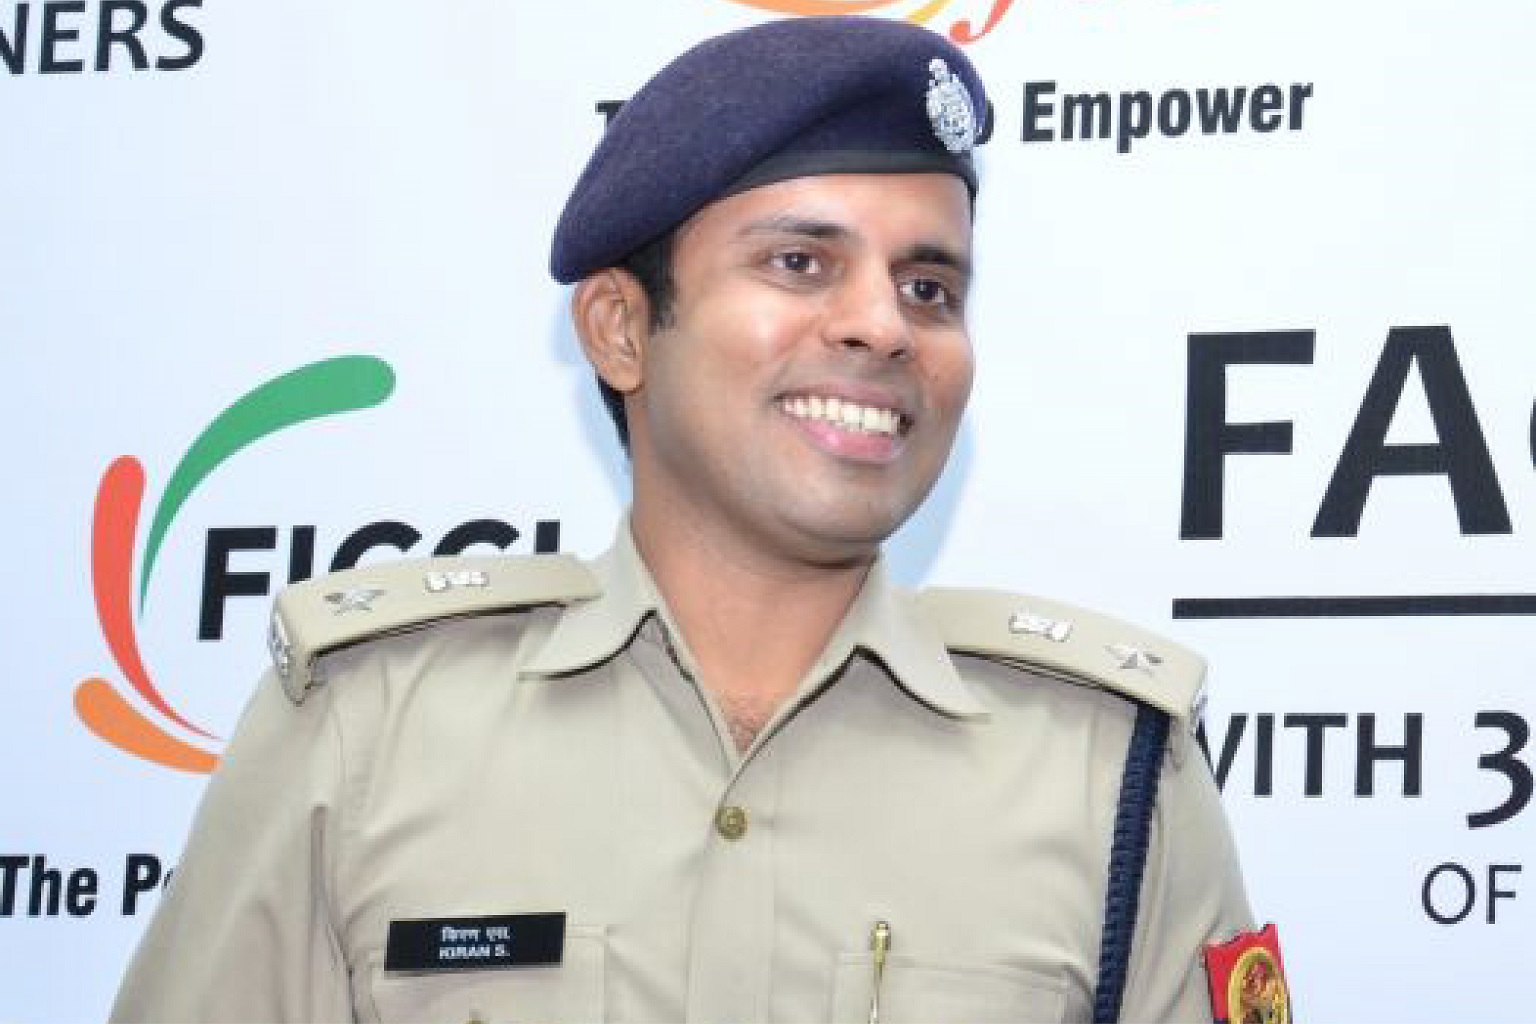 Successful candidate from Himalai IAS, Kiran an IPS officer